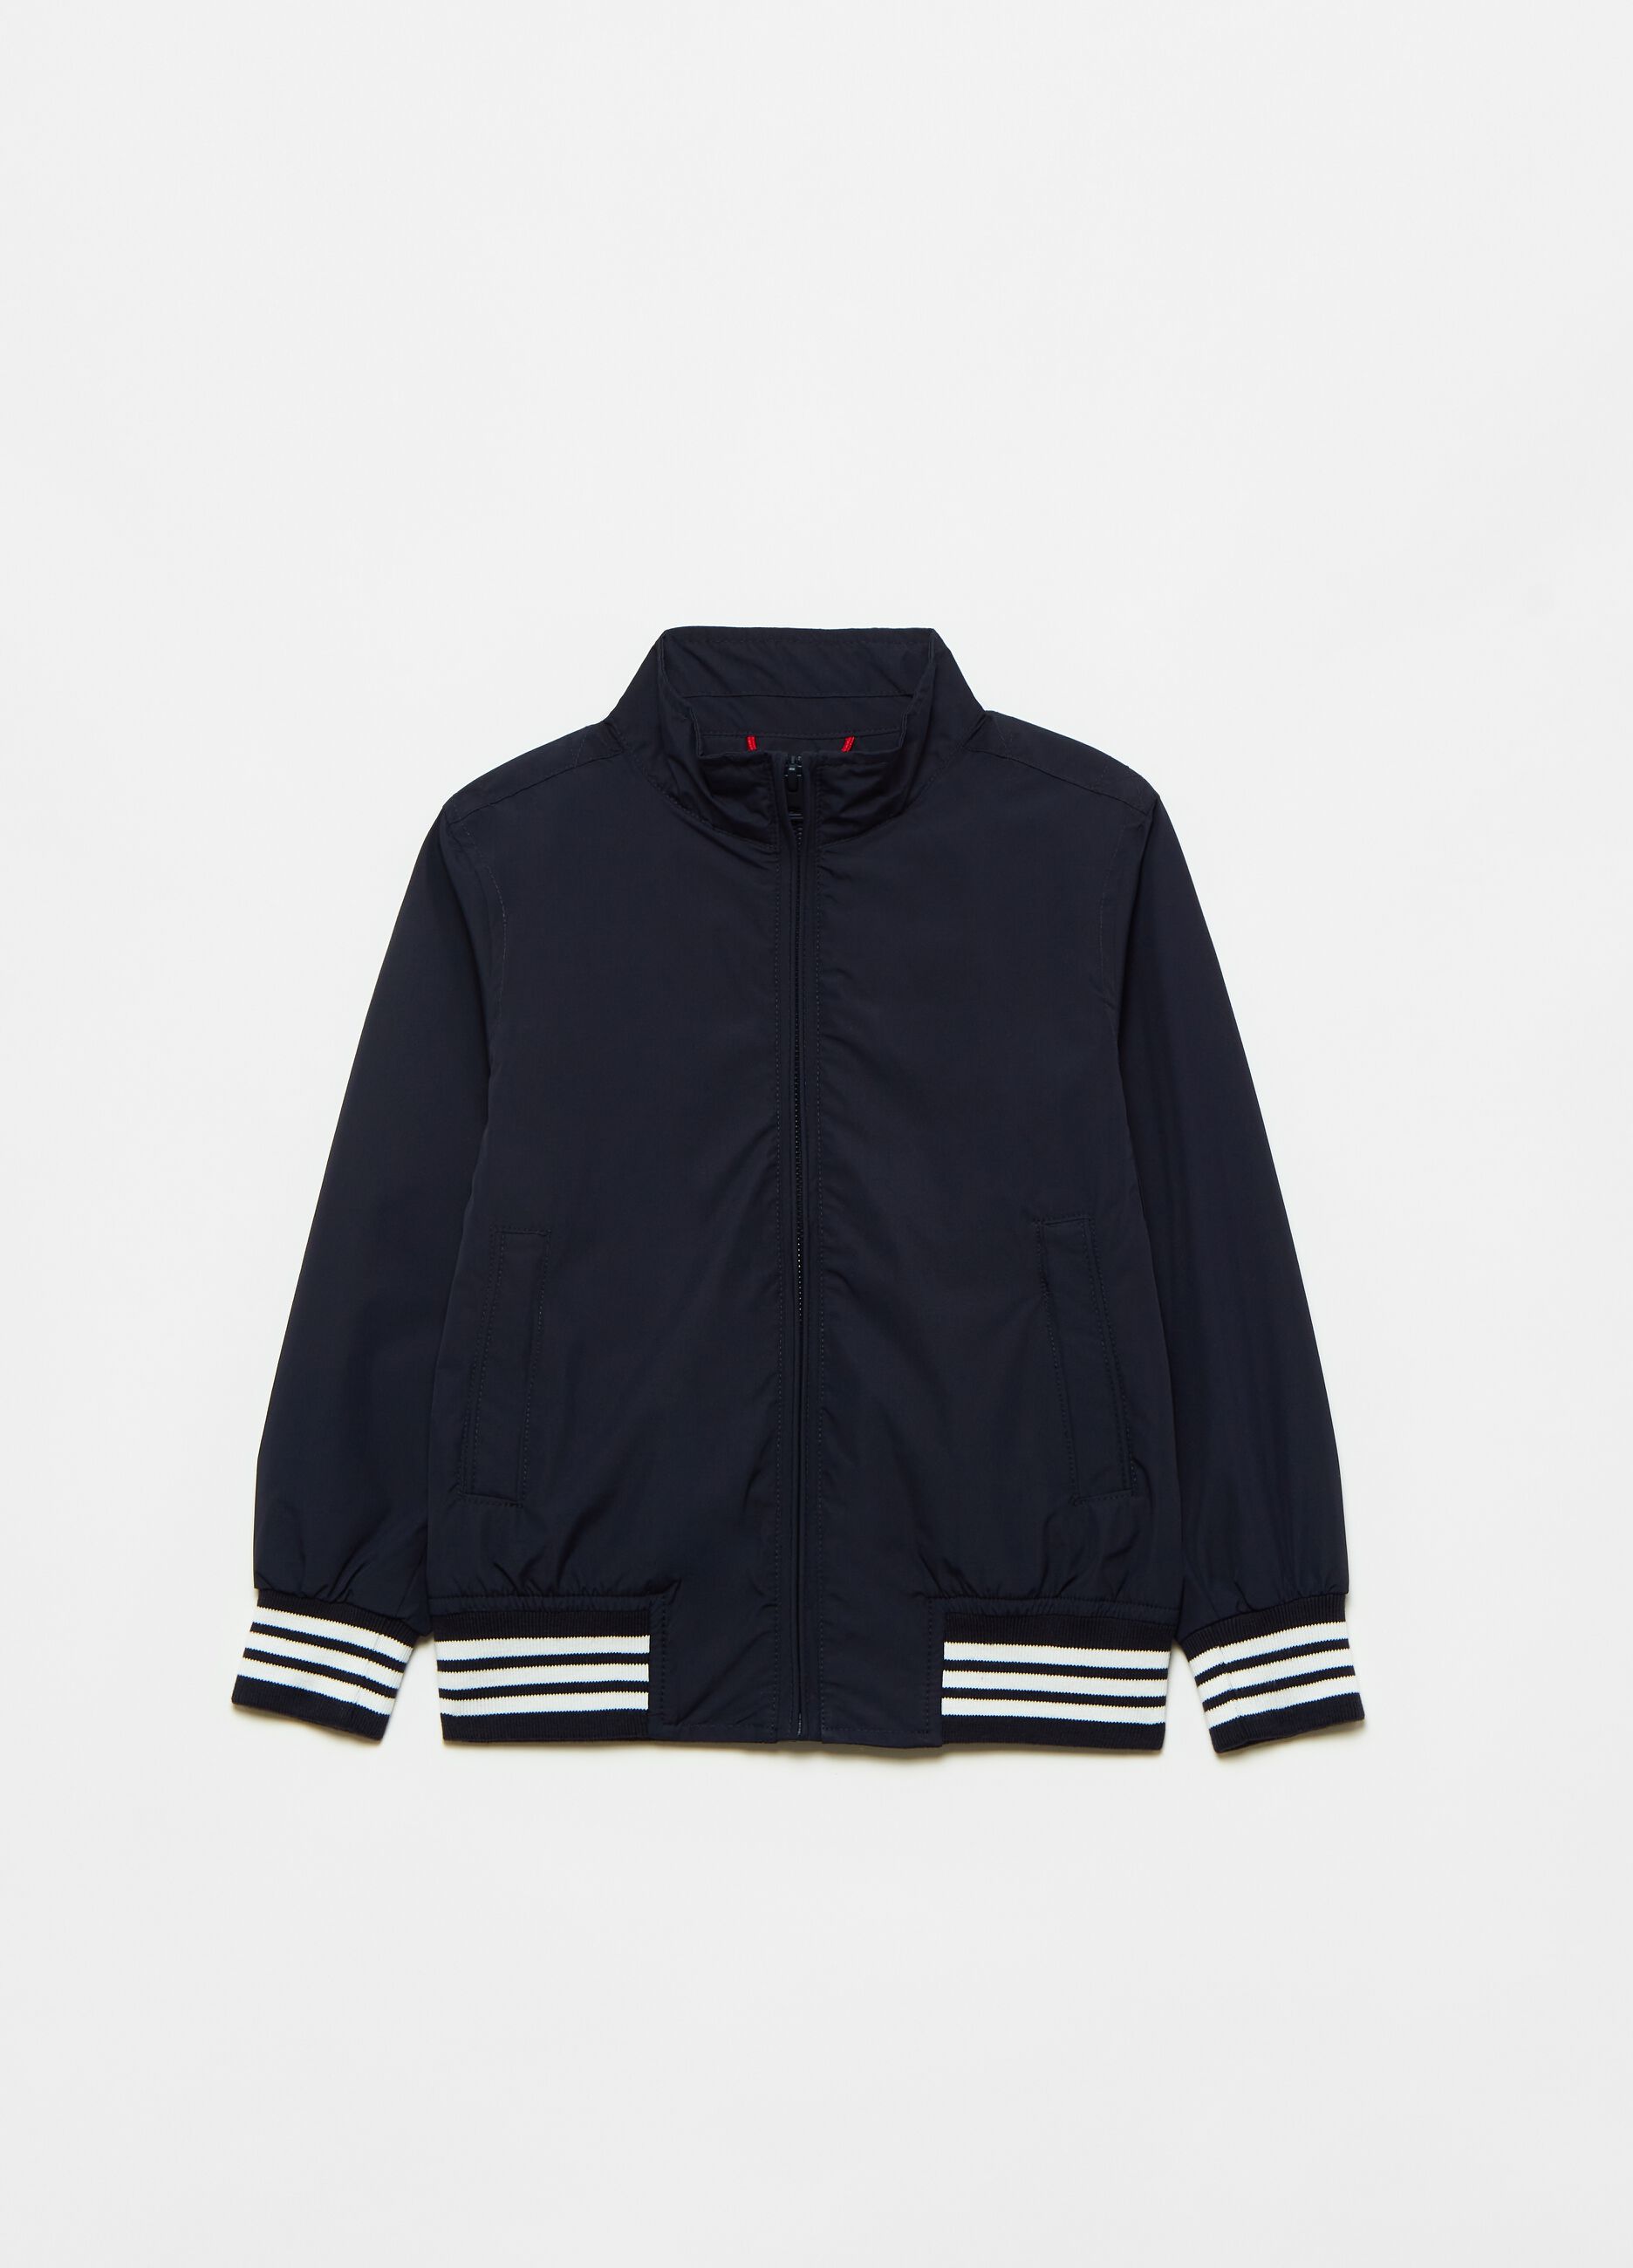 Windbreaker with striped details